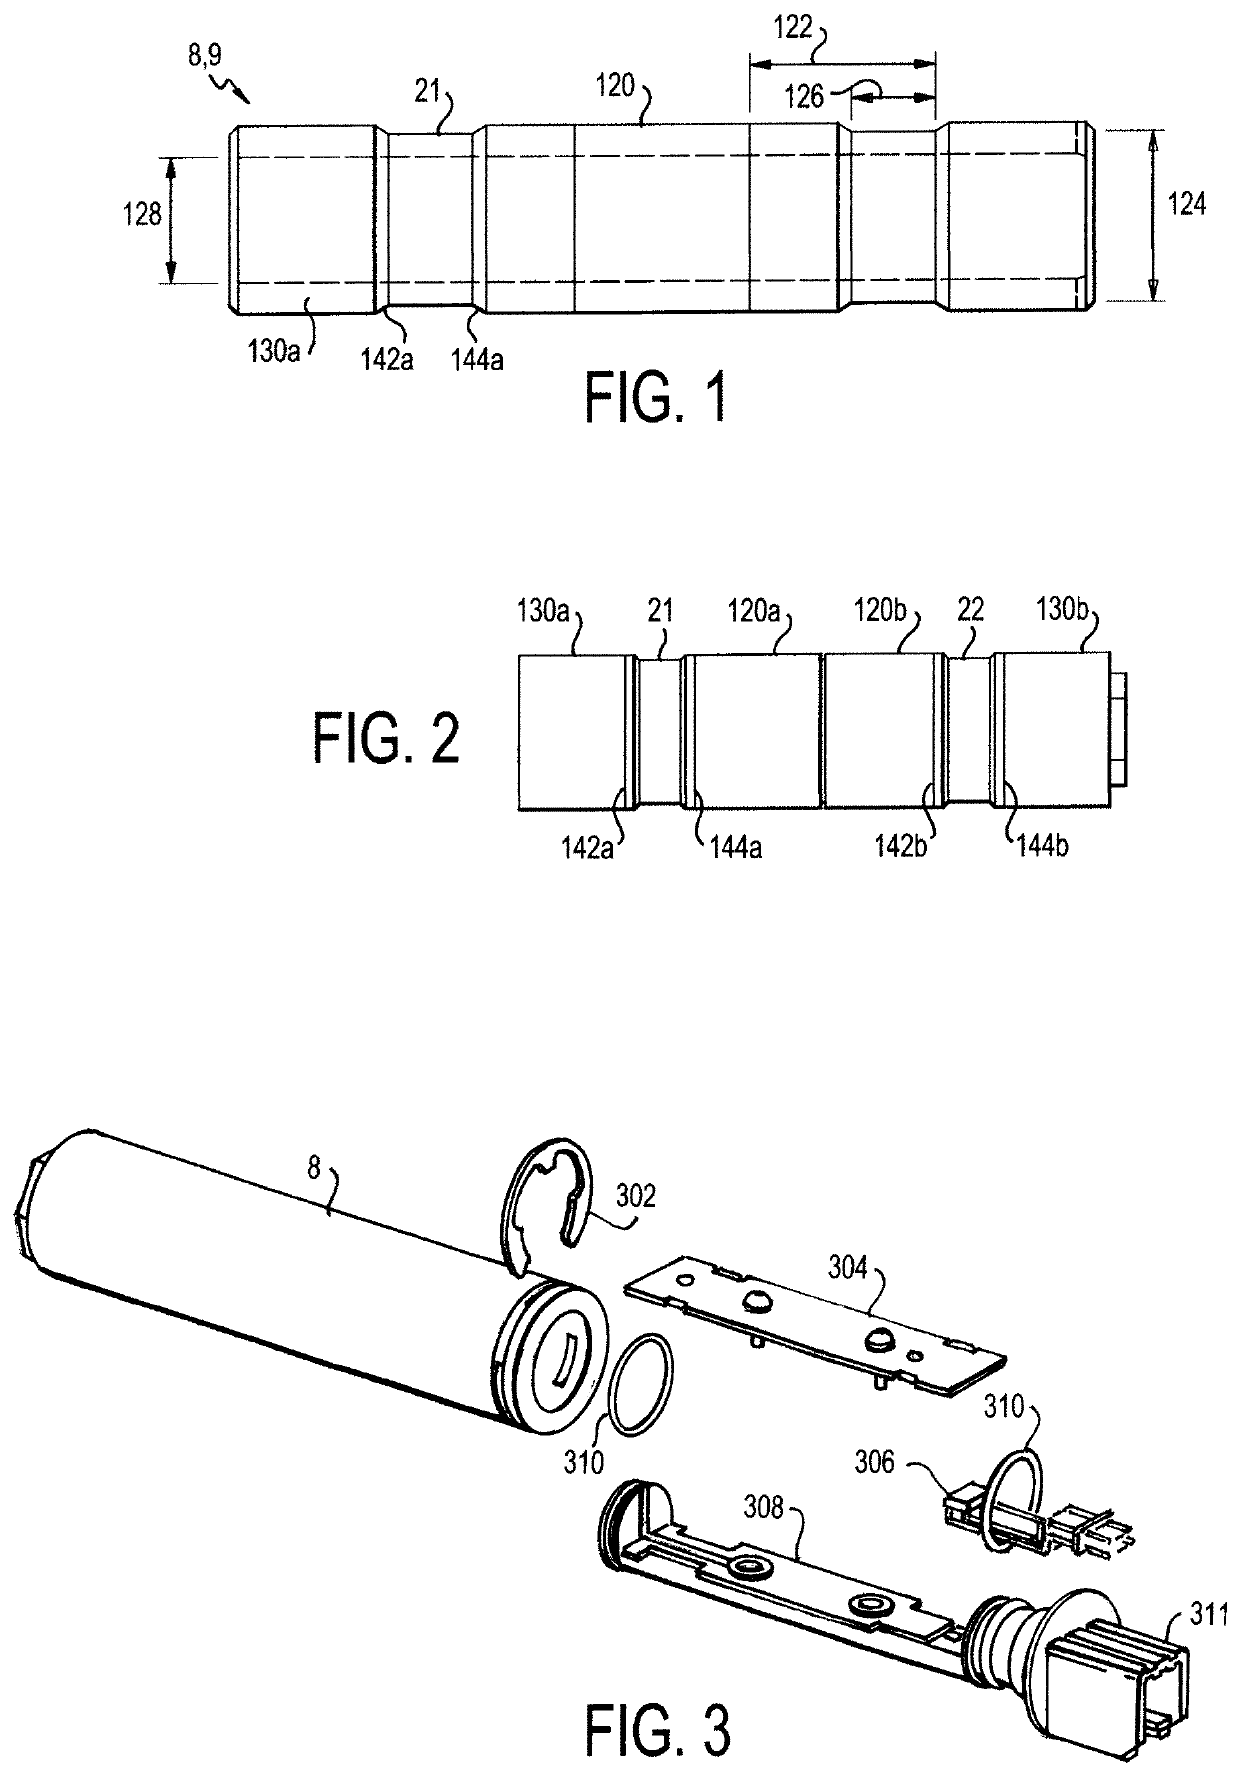 Towing systems and methods using magnetic field sensing